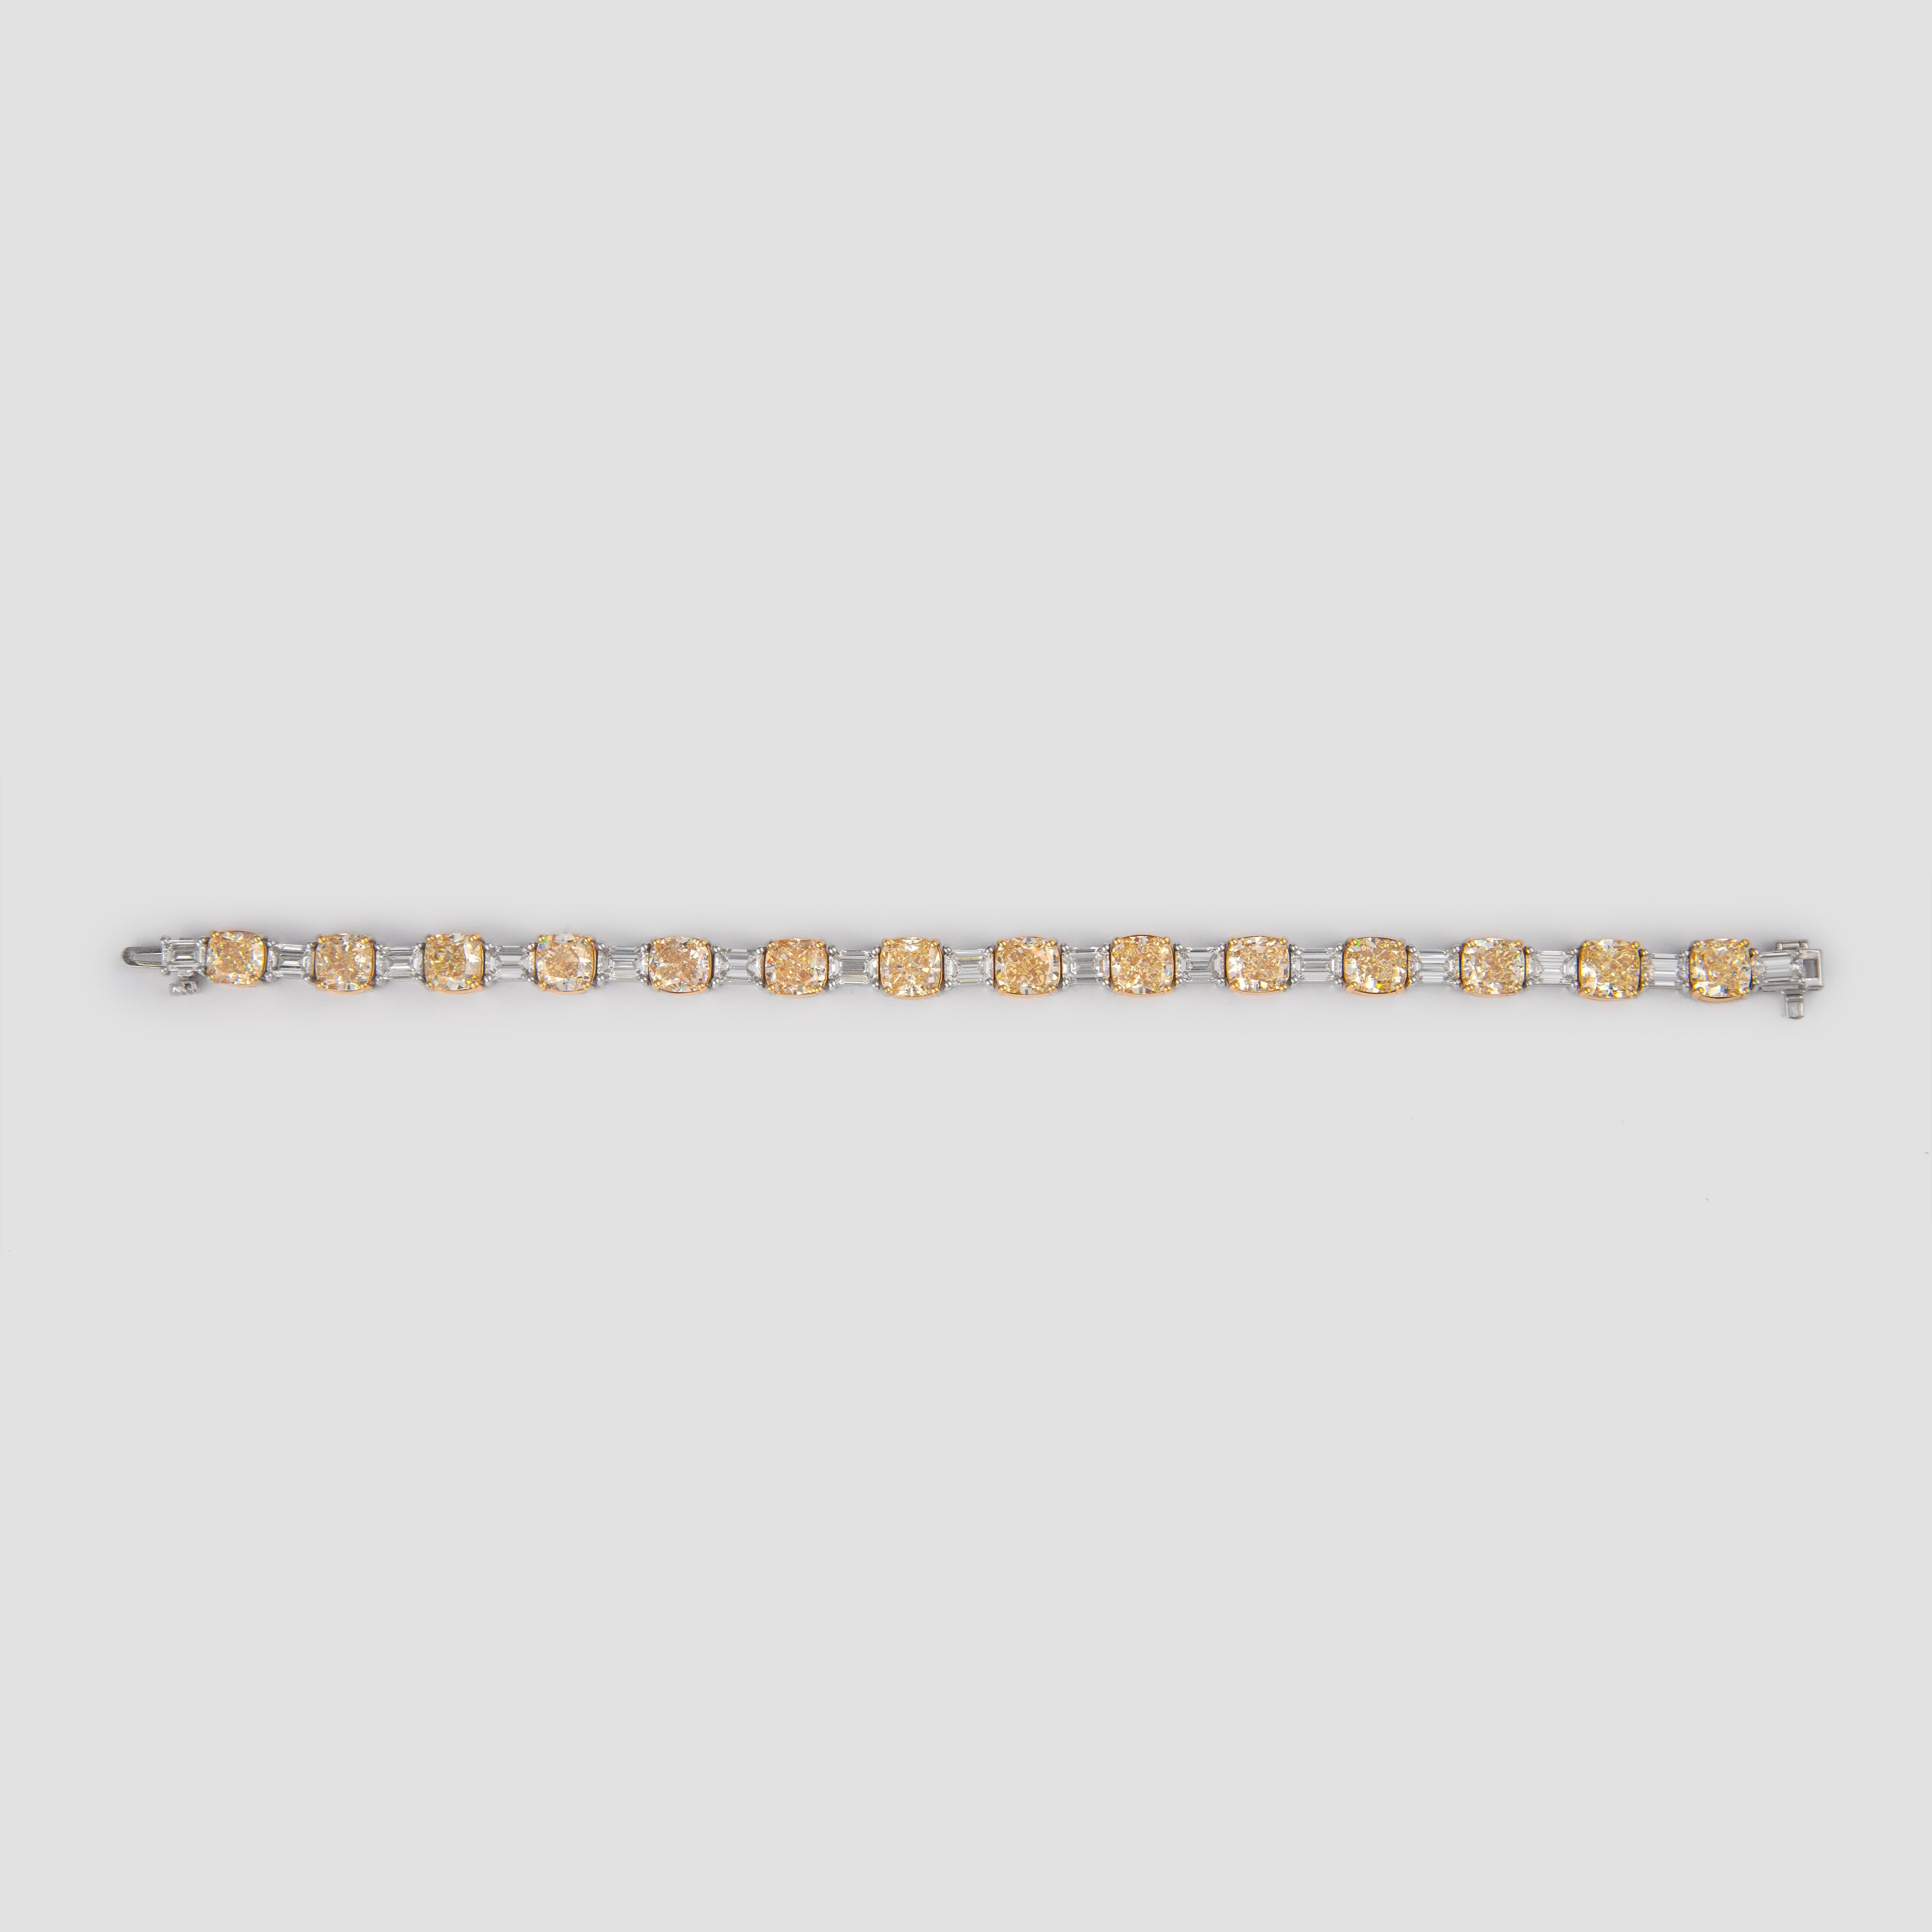 Alternating cushion & emerald cut diamond bracelet, all yellowish diamonds with GIA report. By Alexander of Beverly Hills.
14 cushion cut diamonds, 21.42 carats total. All Y/Z color, VS1-SI2 clarity and all GIA certified. 15 emerald cut diamonds,